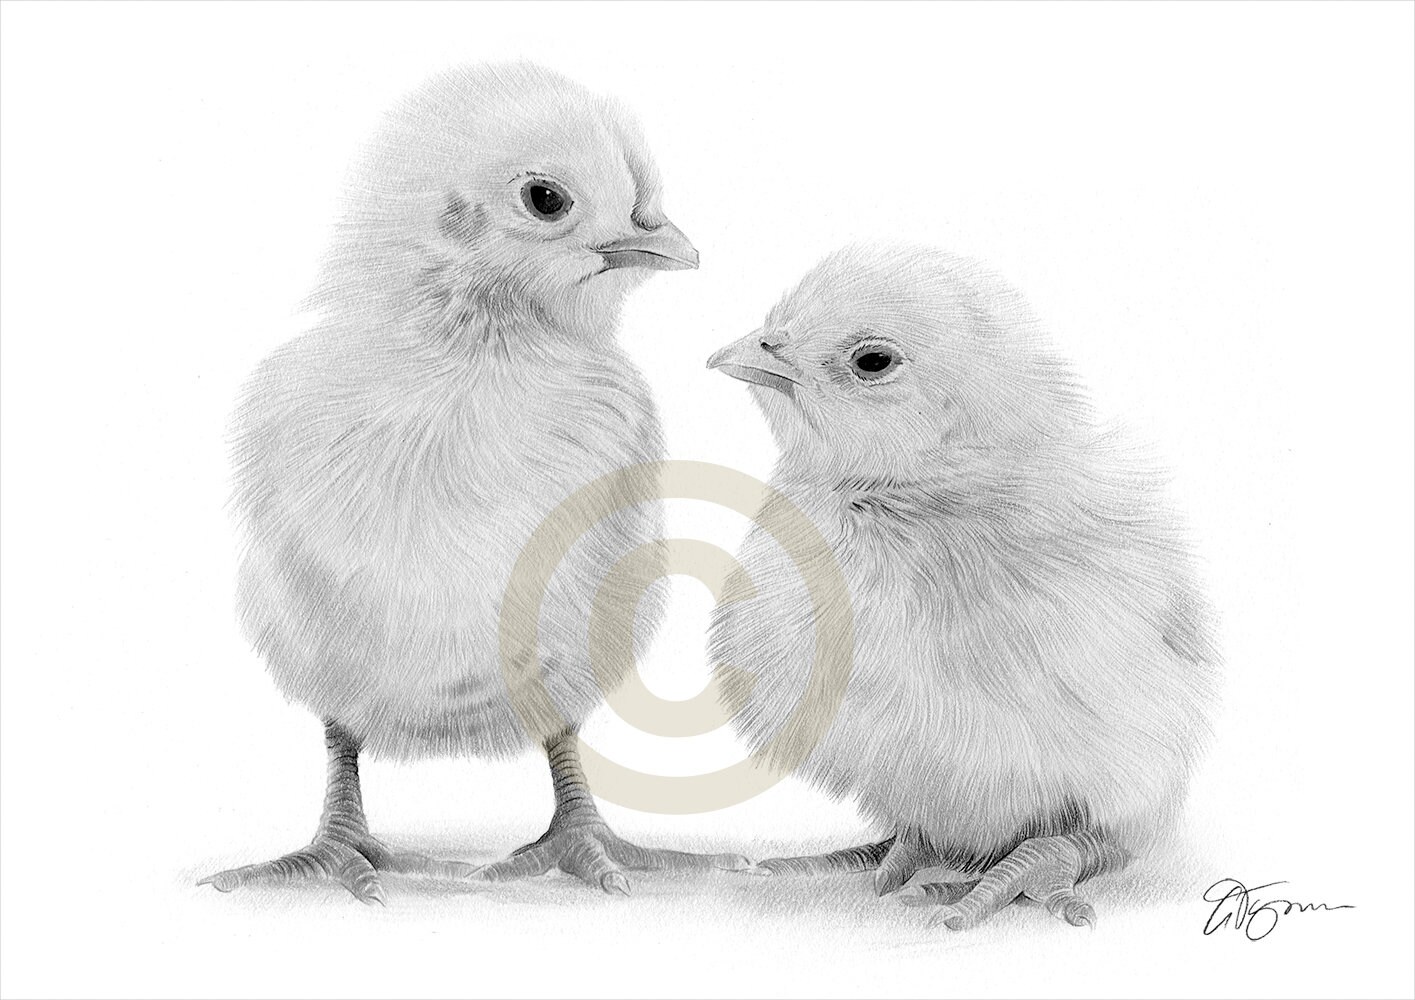 How to Draw a Baby Chick – Step by Step Drawing Guide - Easy Peasy and Fun